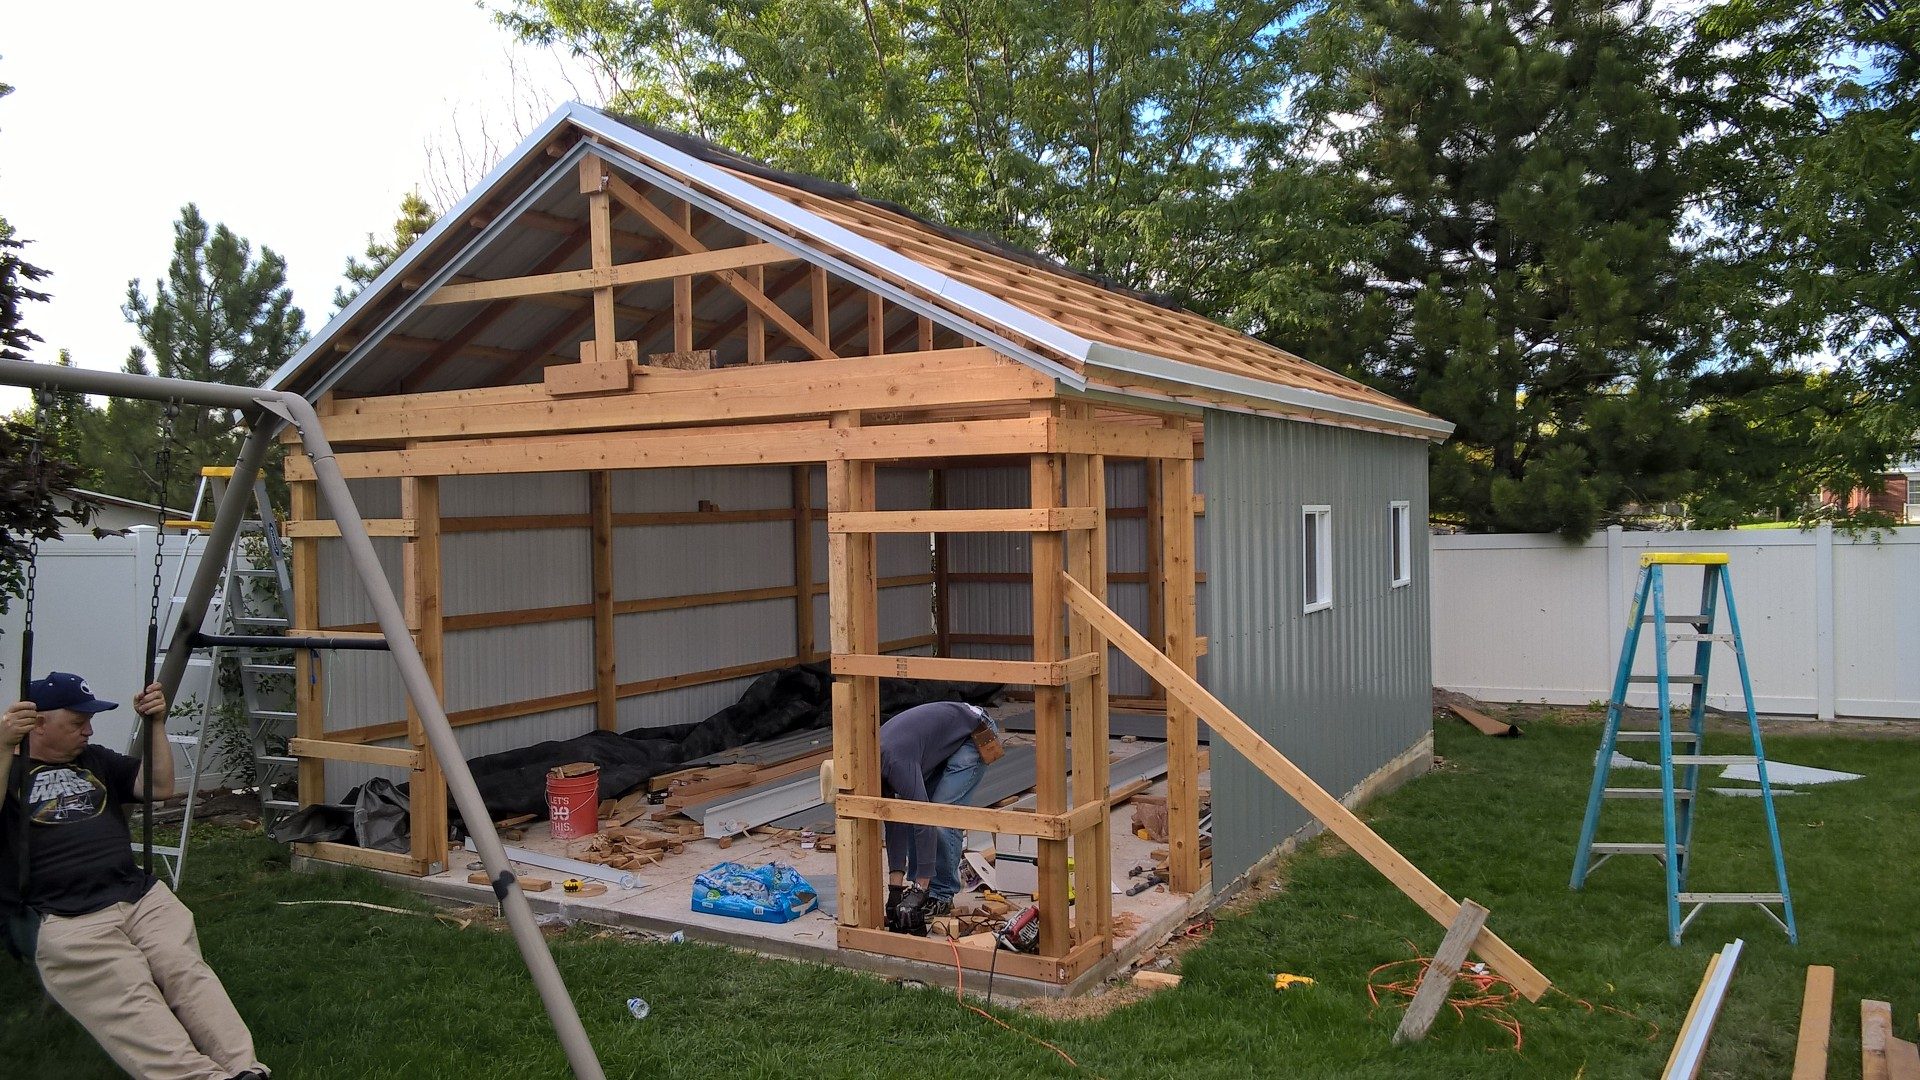 Building A Pole Barn Shed From Scratch P3 Planning Pole Barn Siding Double Diamond Hill Ranch